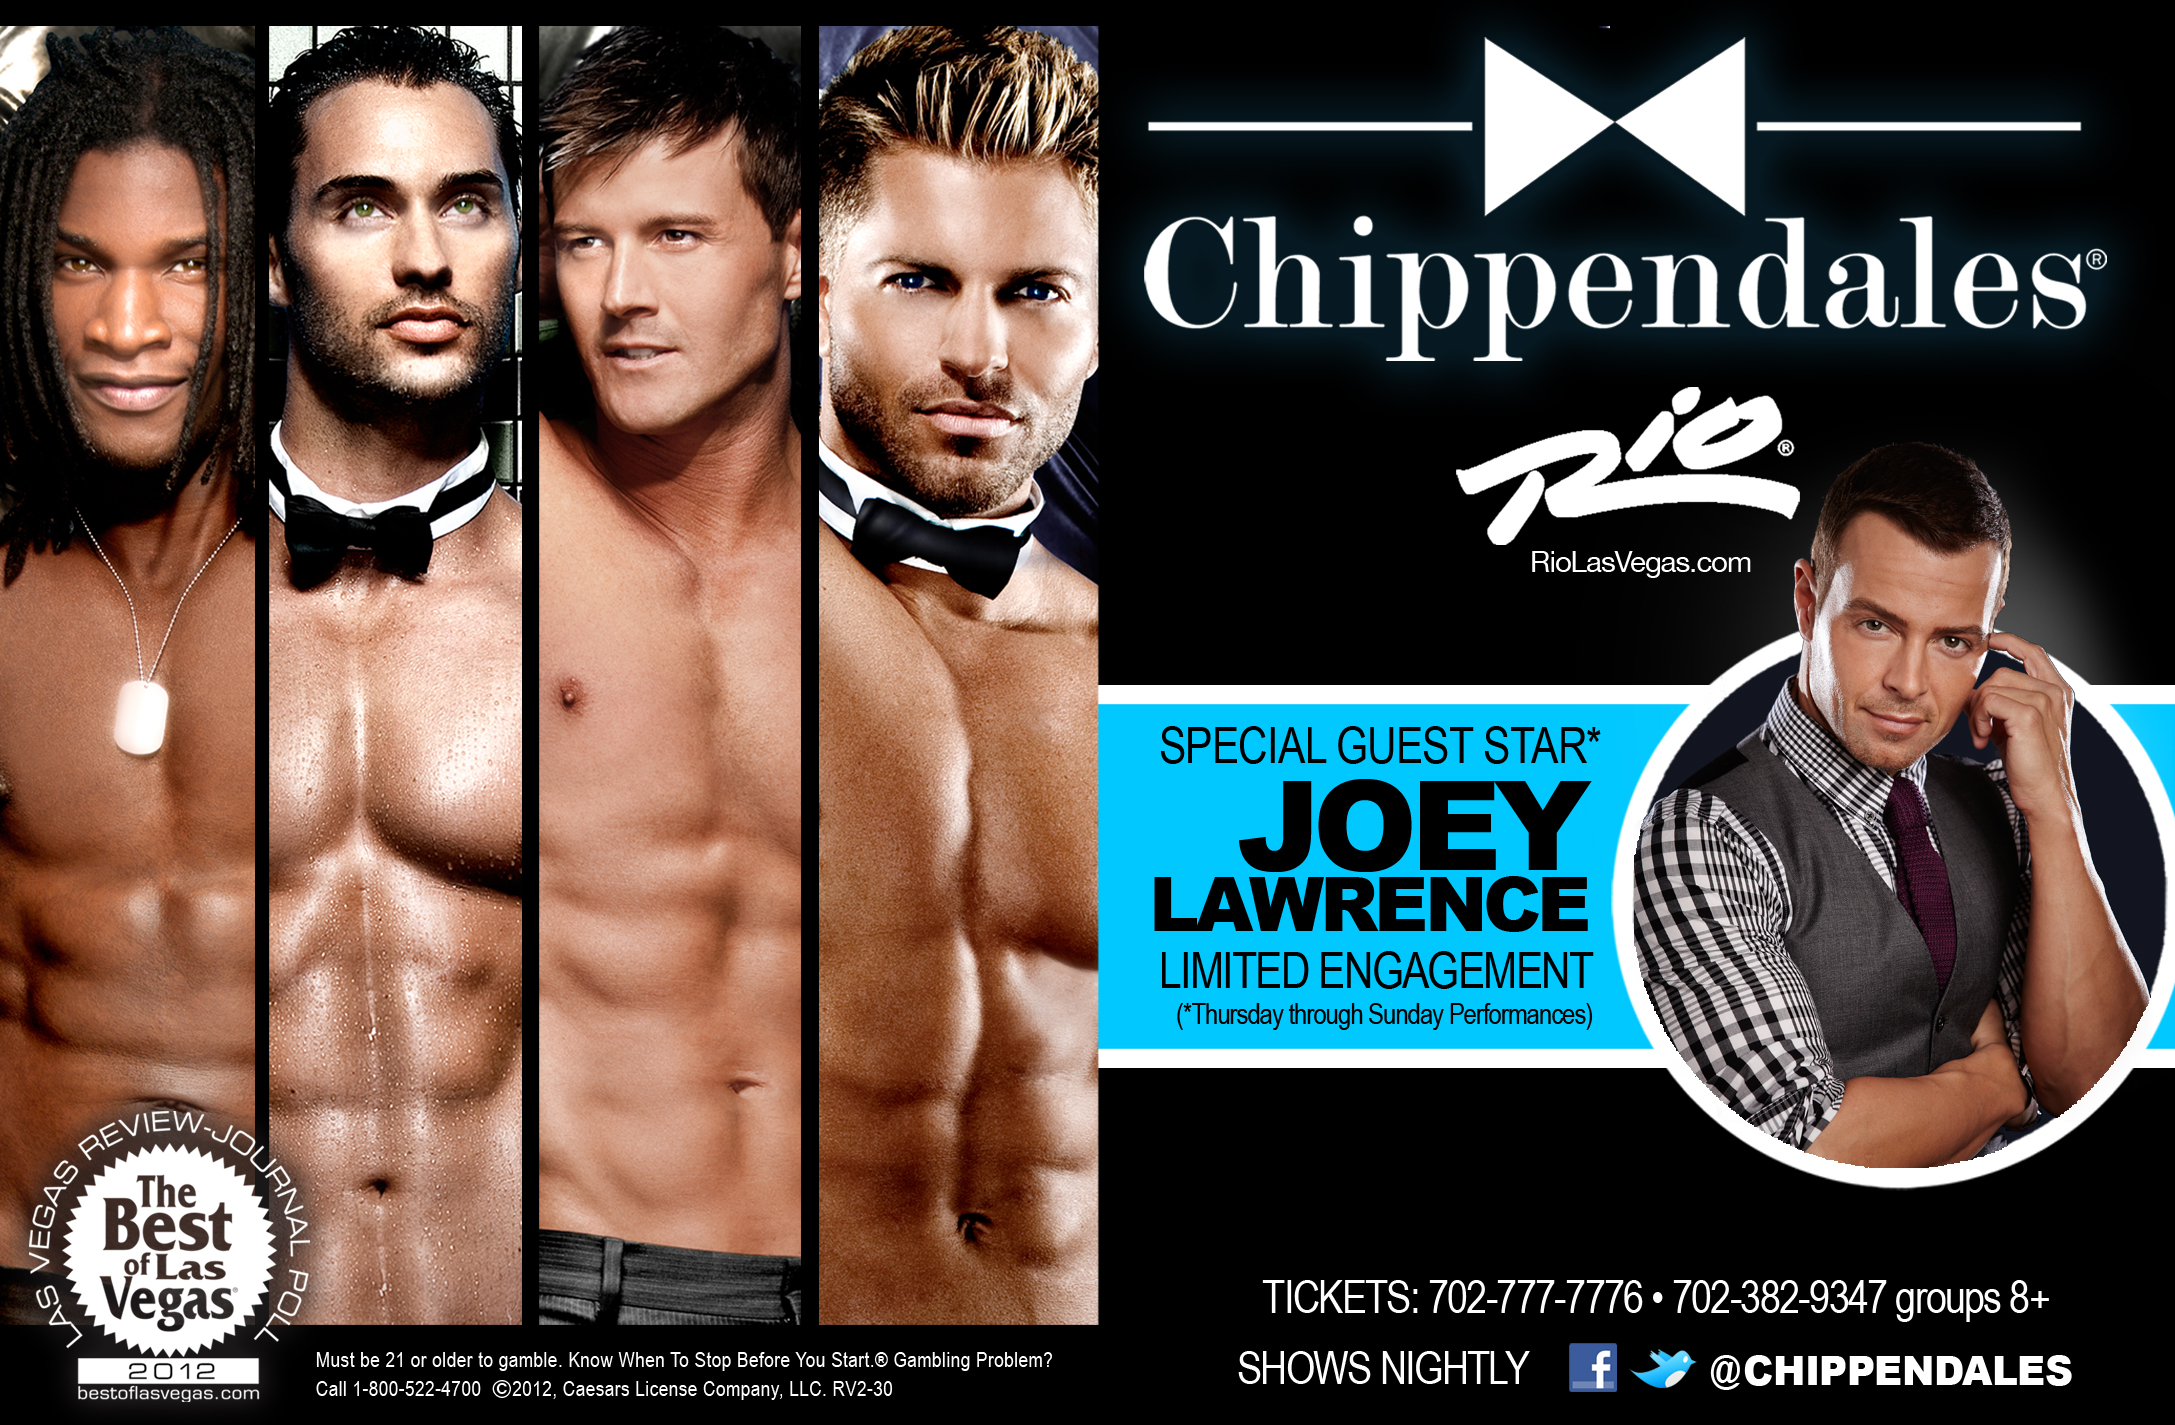 Index of /stripclubs/images/chippendales.